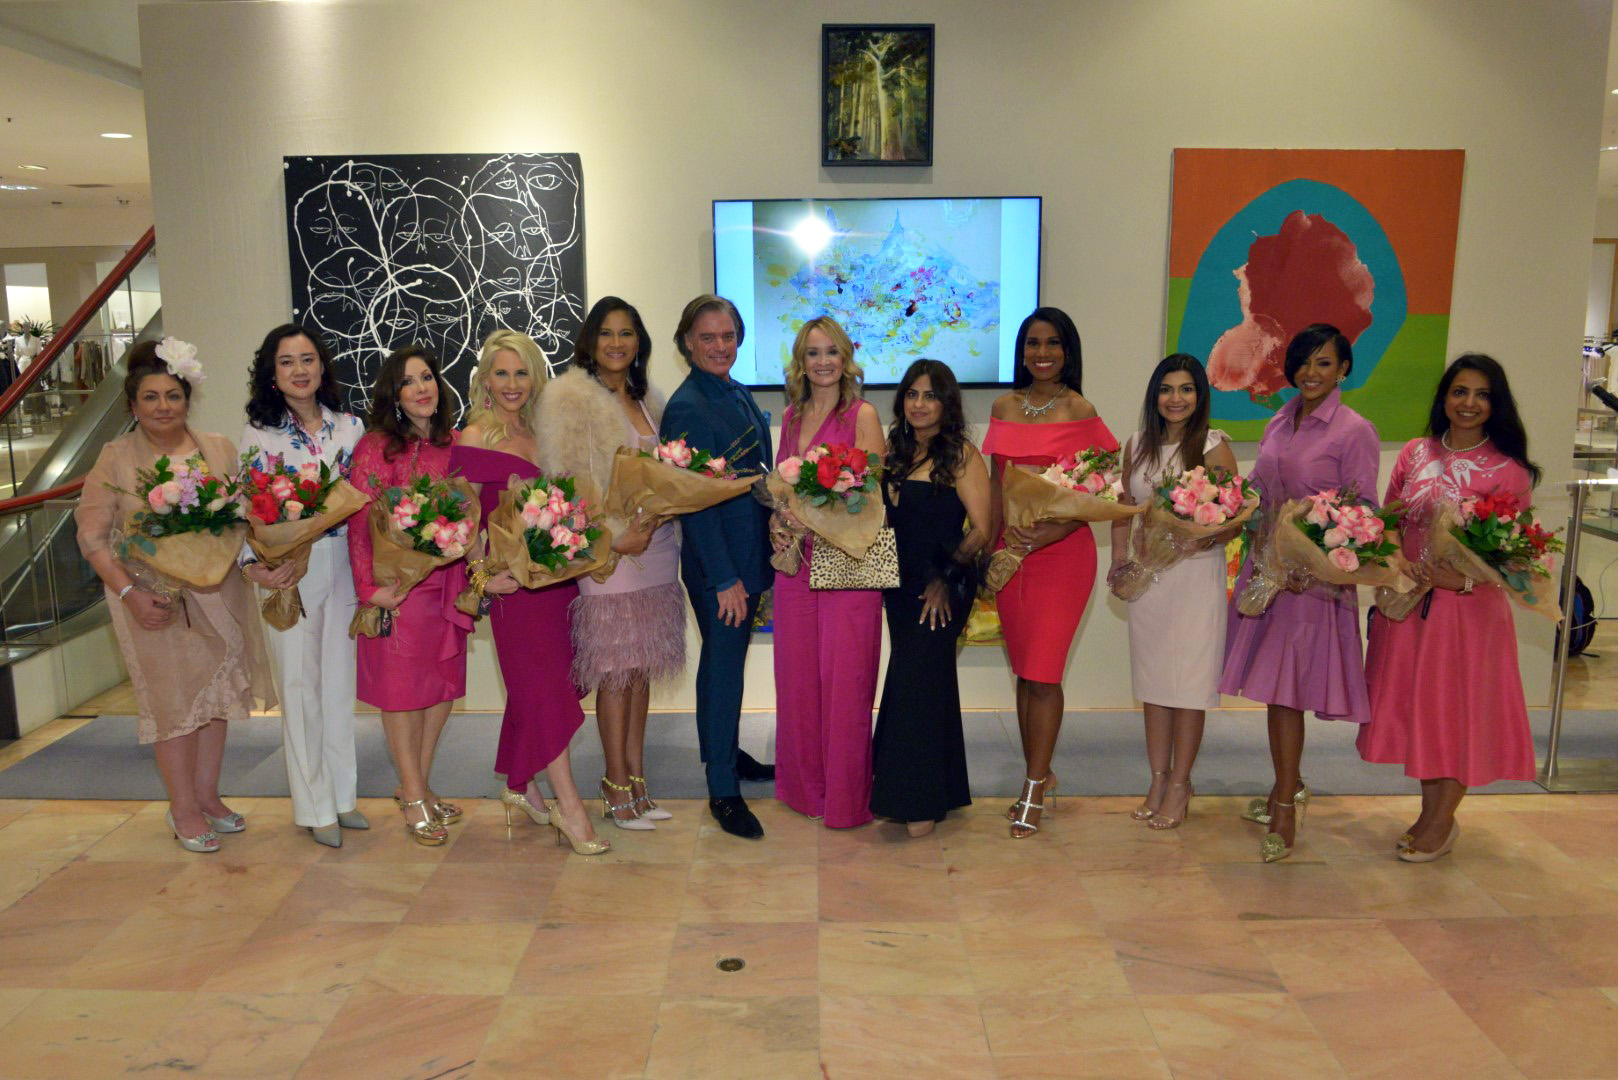 Stephen Brunelle, VP General Manager of Neiman Marcus, and Ruchi Mukherjee  Host & Founder of International Mother's Day Soirée Reveal the 2019  Honorees at Neiman Marcus